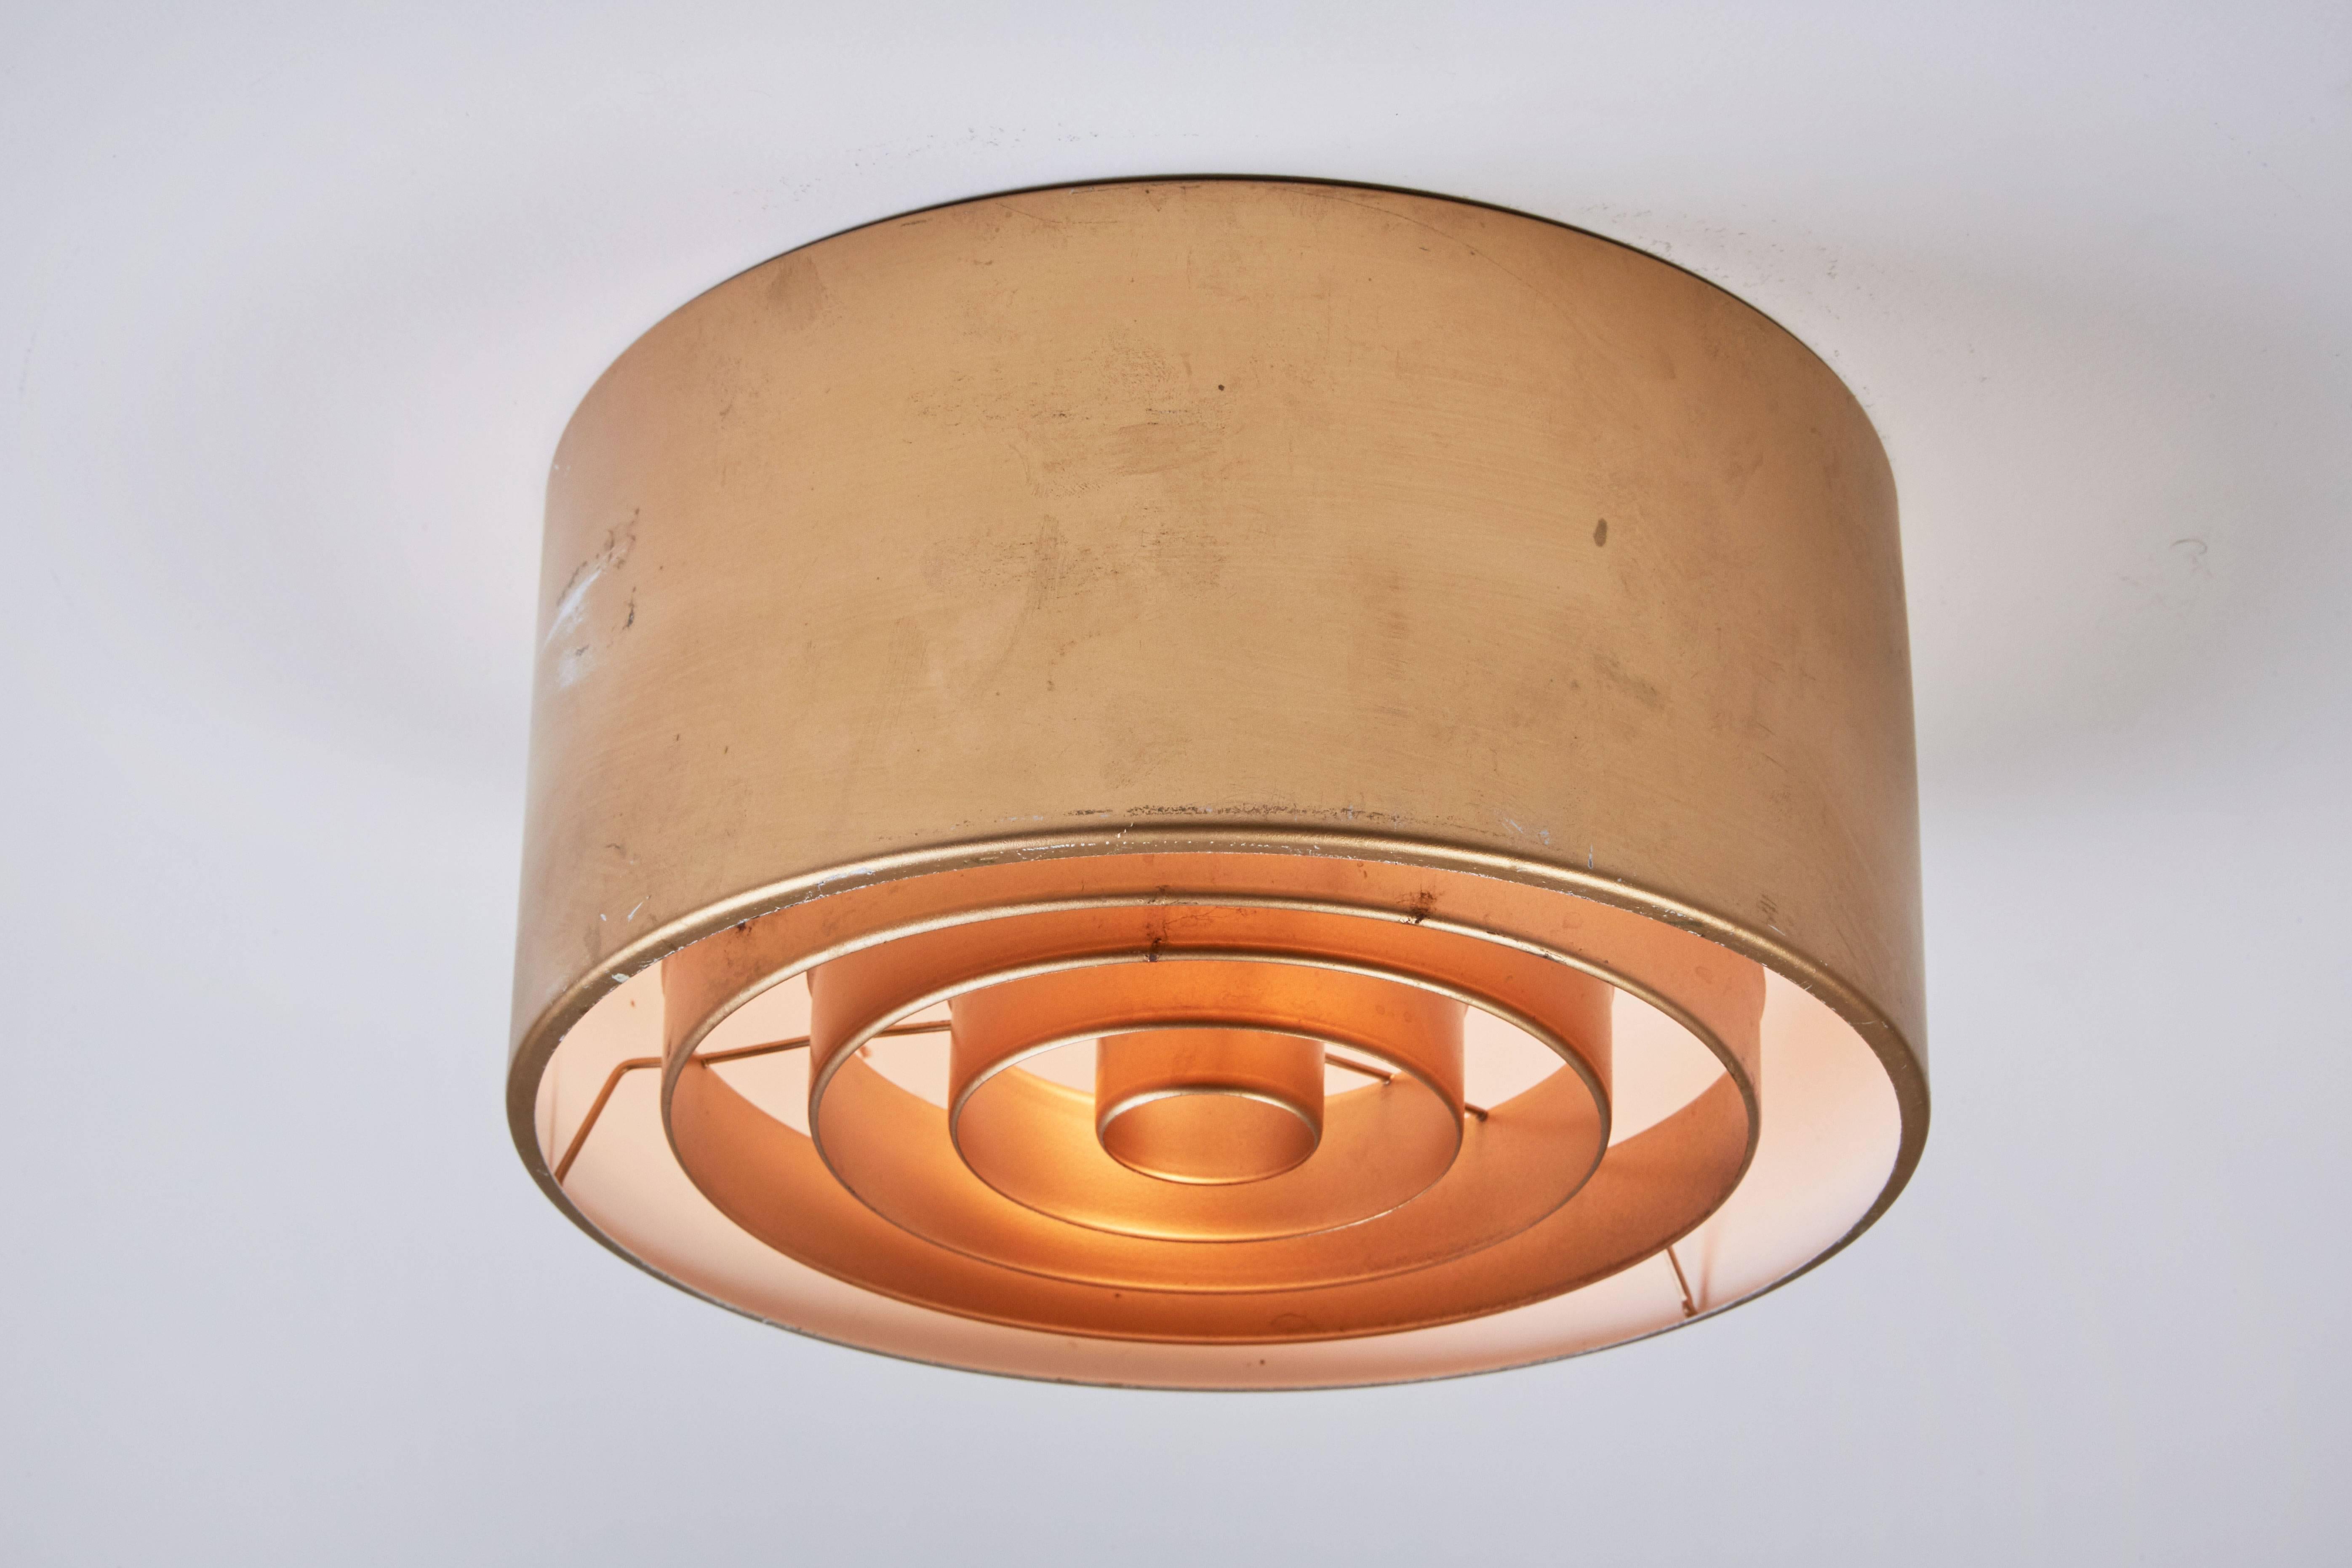 Bronzed Two Model 971-135/25 Ceiling Lights by Yki Nummi for Stockmann Orno